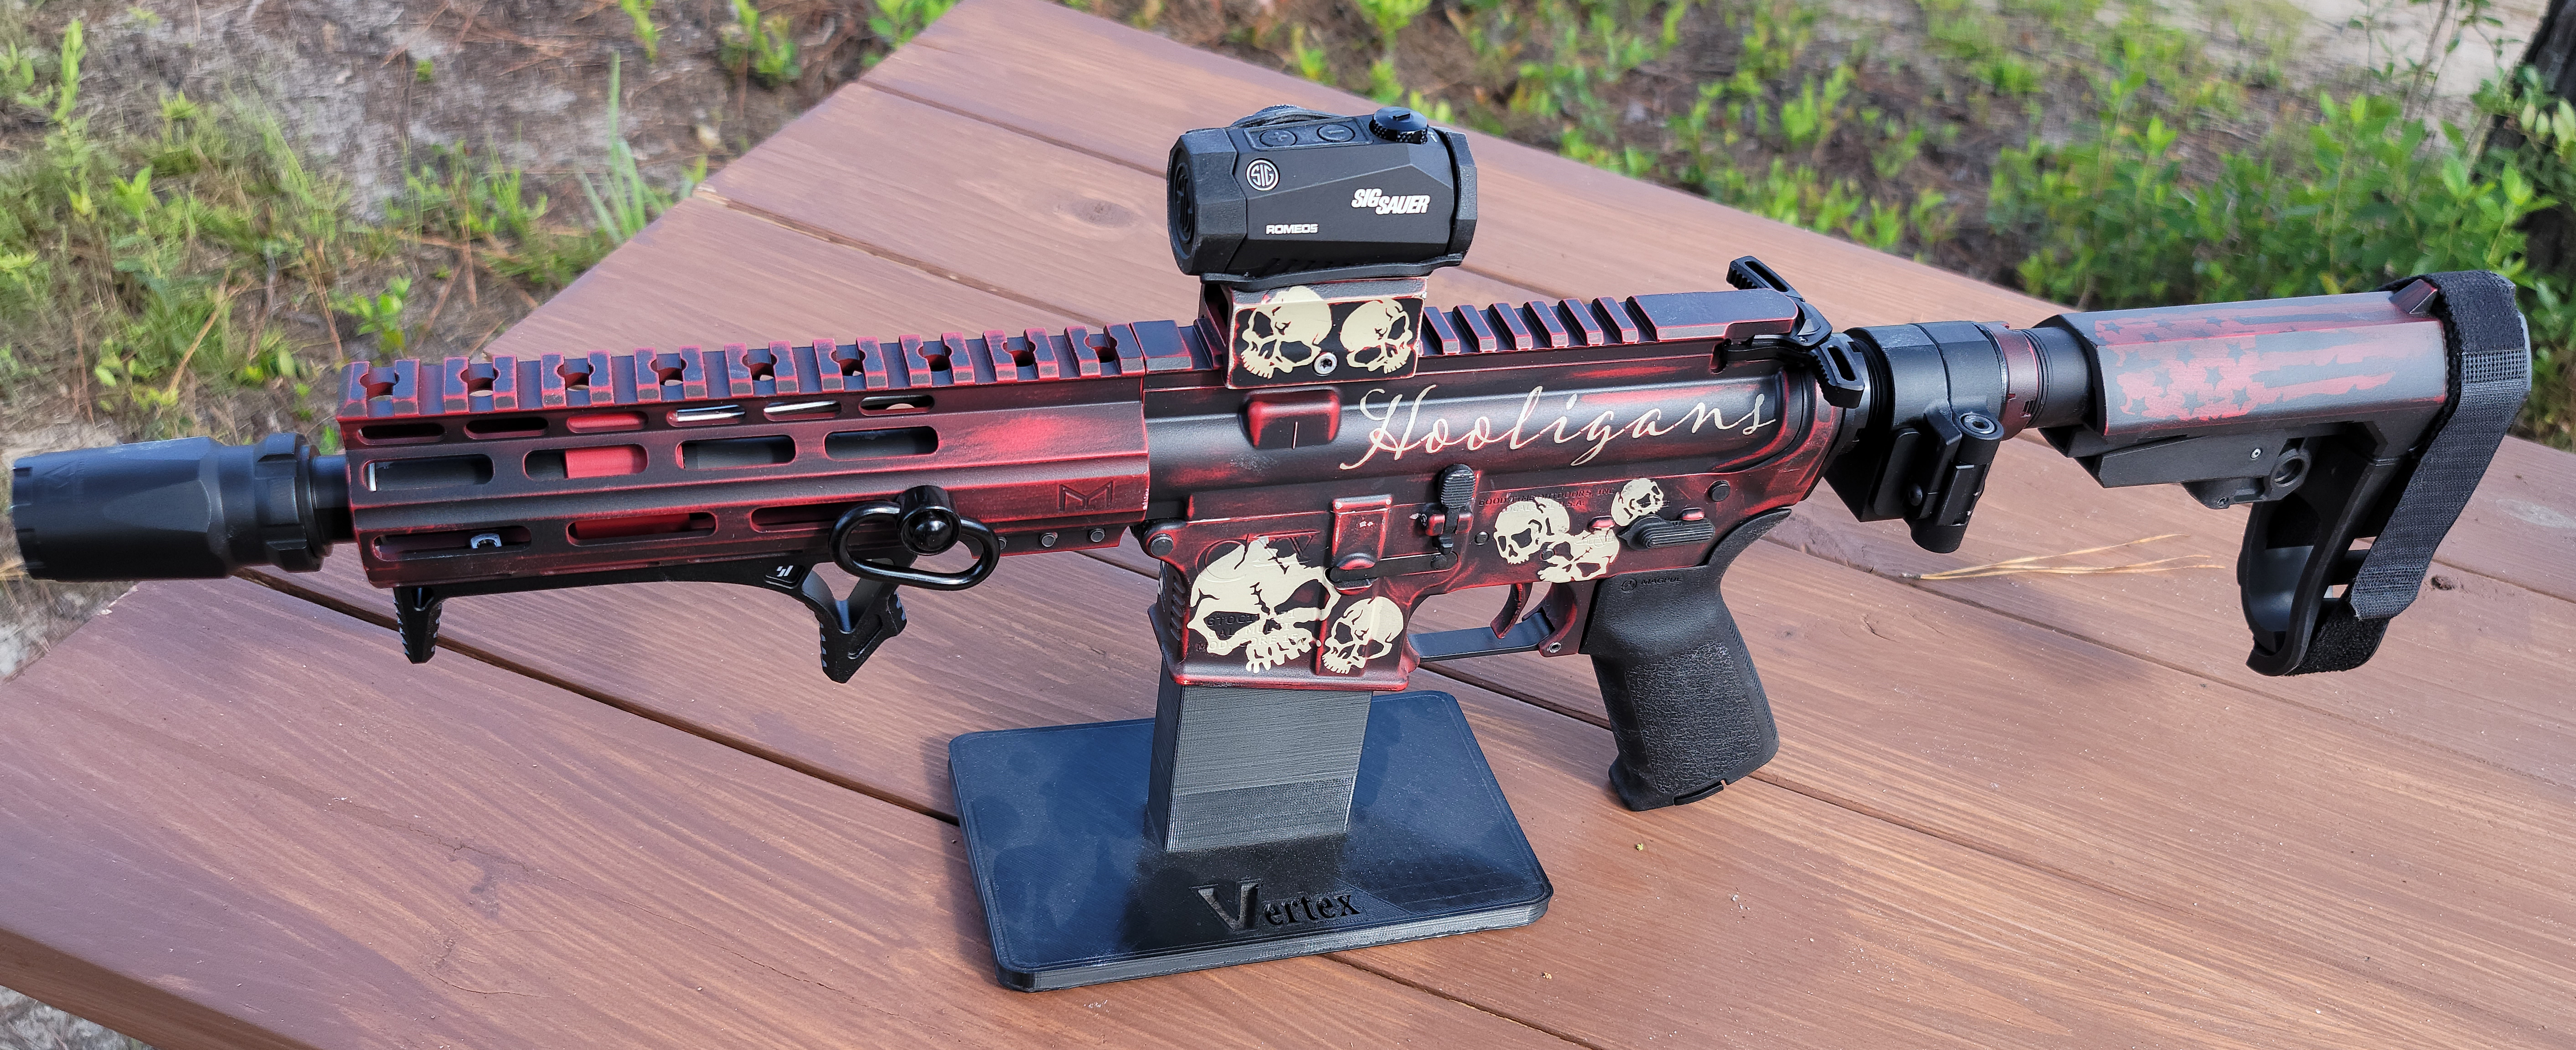 Cerakoted: S.H.O.T,Desert Sage H-247,Core Rifle Systems,Graphite Black H-146,RUBY RED H-306,.300 Blackout